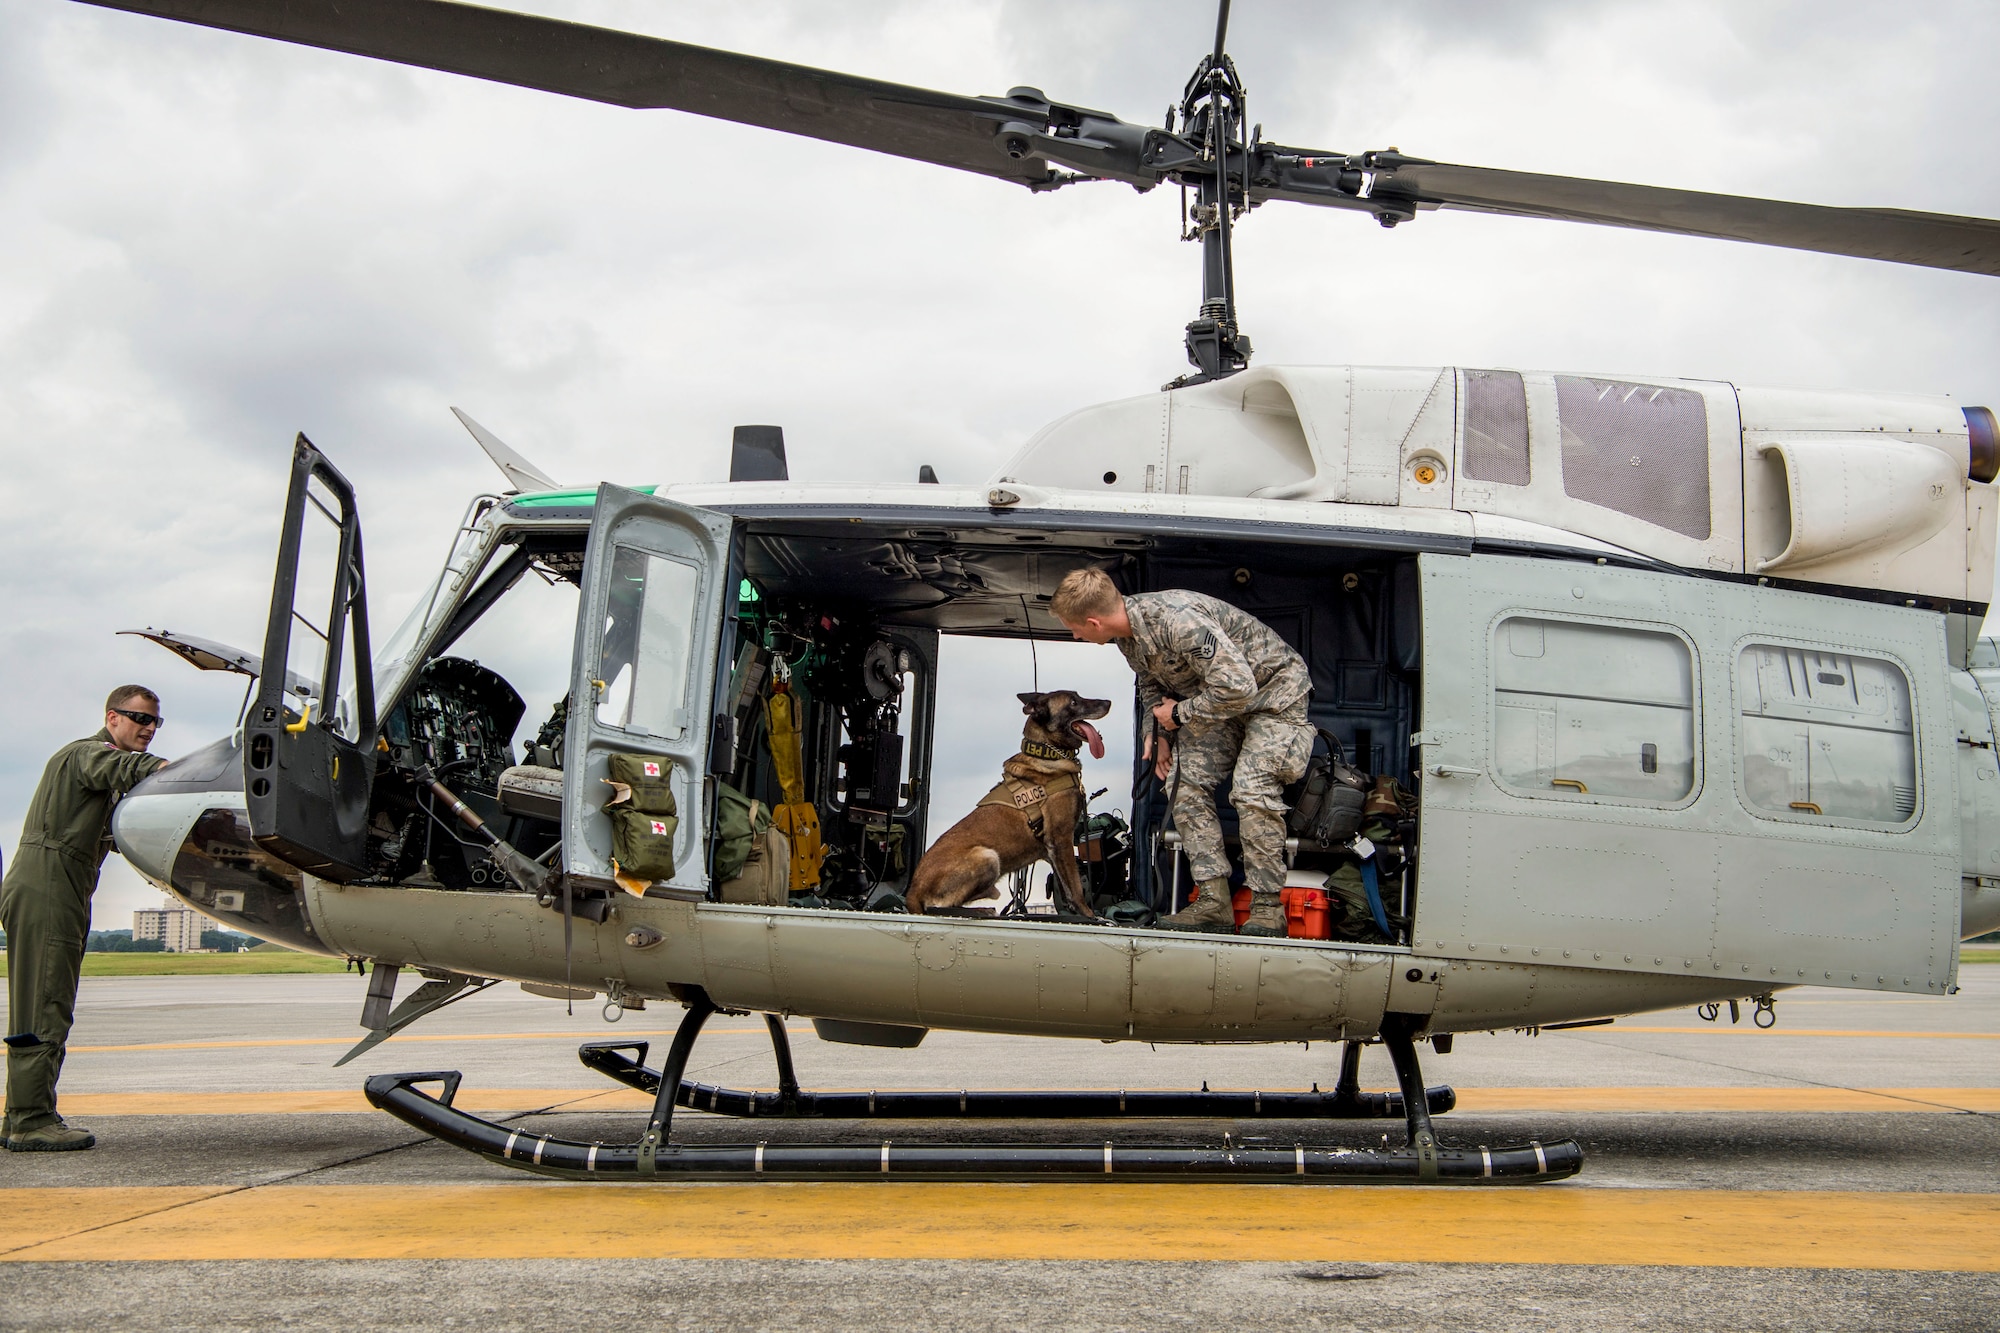 Staff Sgt. Cody Nickell, 374th Security Forces Squadron military working dog handler, works with Topa, 374th SFS MWD, to get him accustomed to being inside a UH-1N helicopter during a 459th Airlift Squadron MWD familiarization flight July 26, 2018, at Yokota Air Base, Japan. Flying in a helicopter can be hard for the MWD’s due to the noise and vibrations, but once the MWDs become comfortable with the aircraft, they can be transported quickly and efficiently to wherever needed. (U.S. Air Force photo by Senior Airman Donald Hudson)